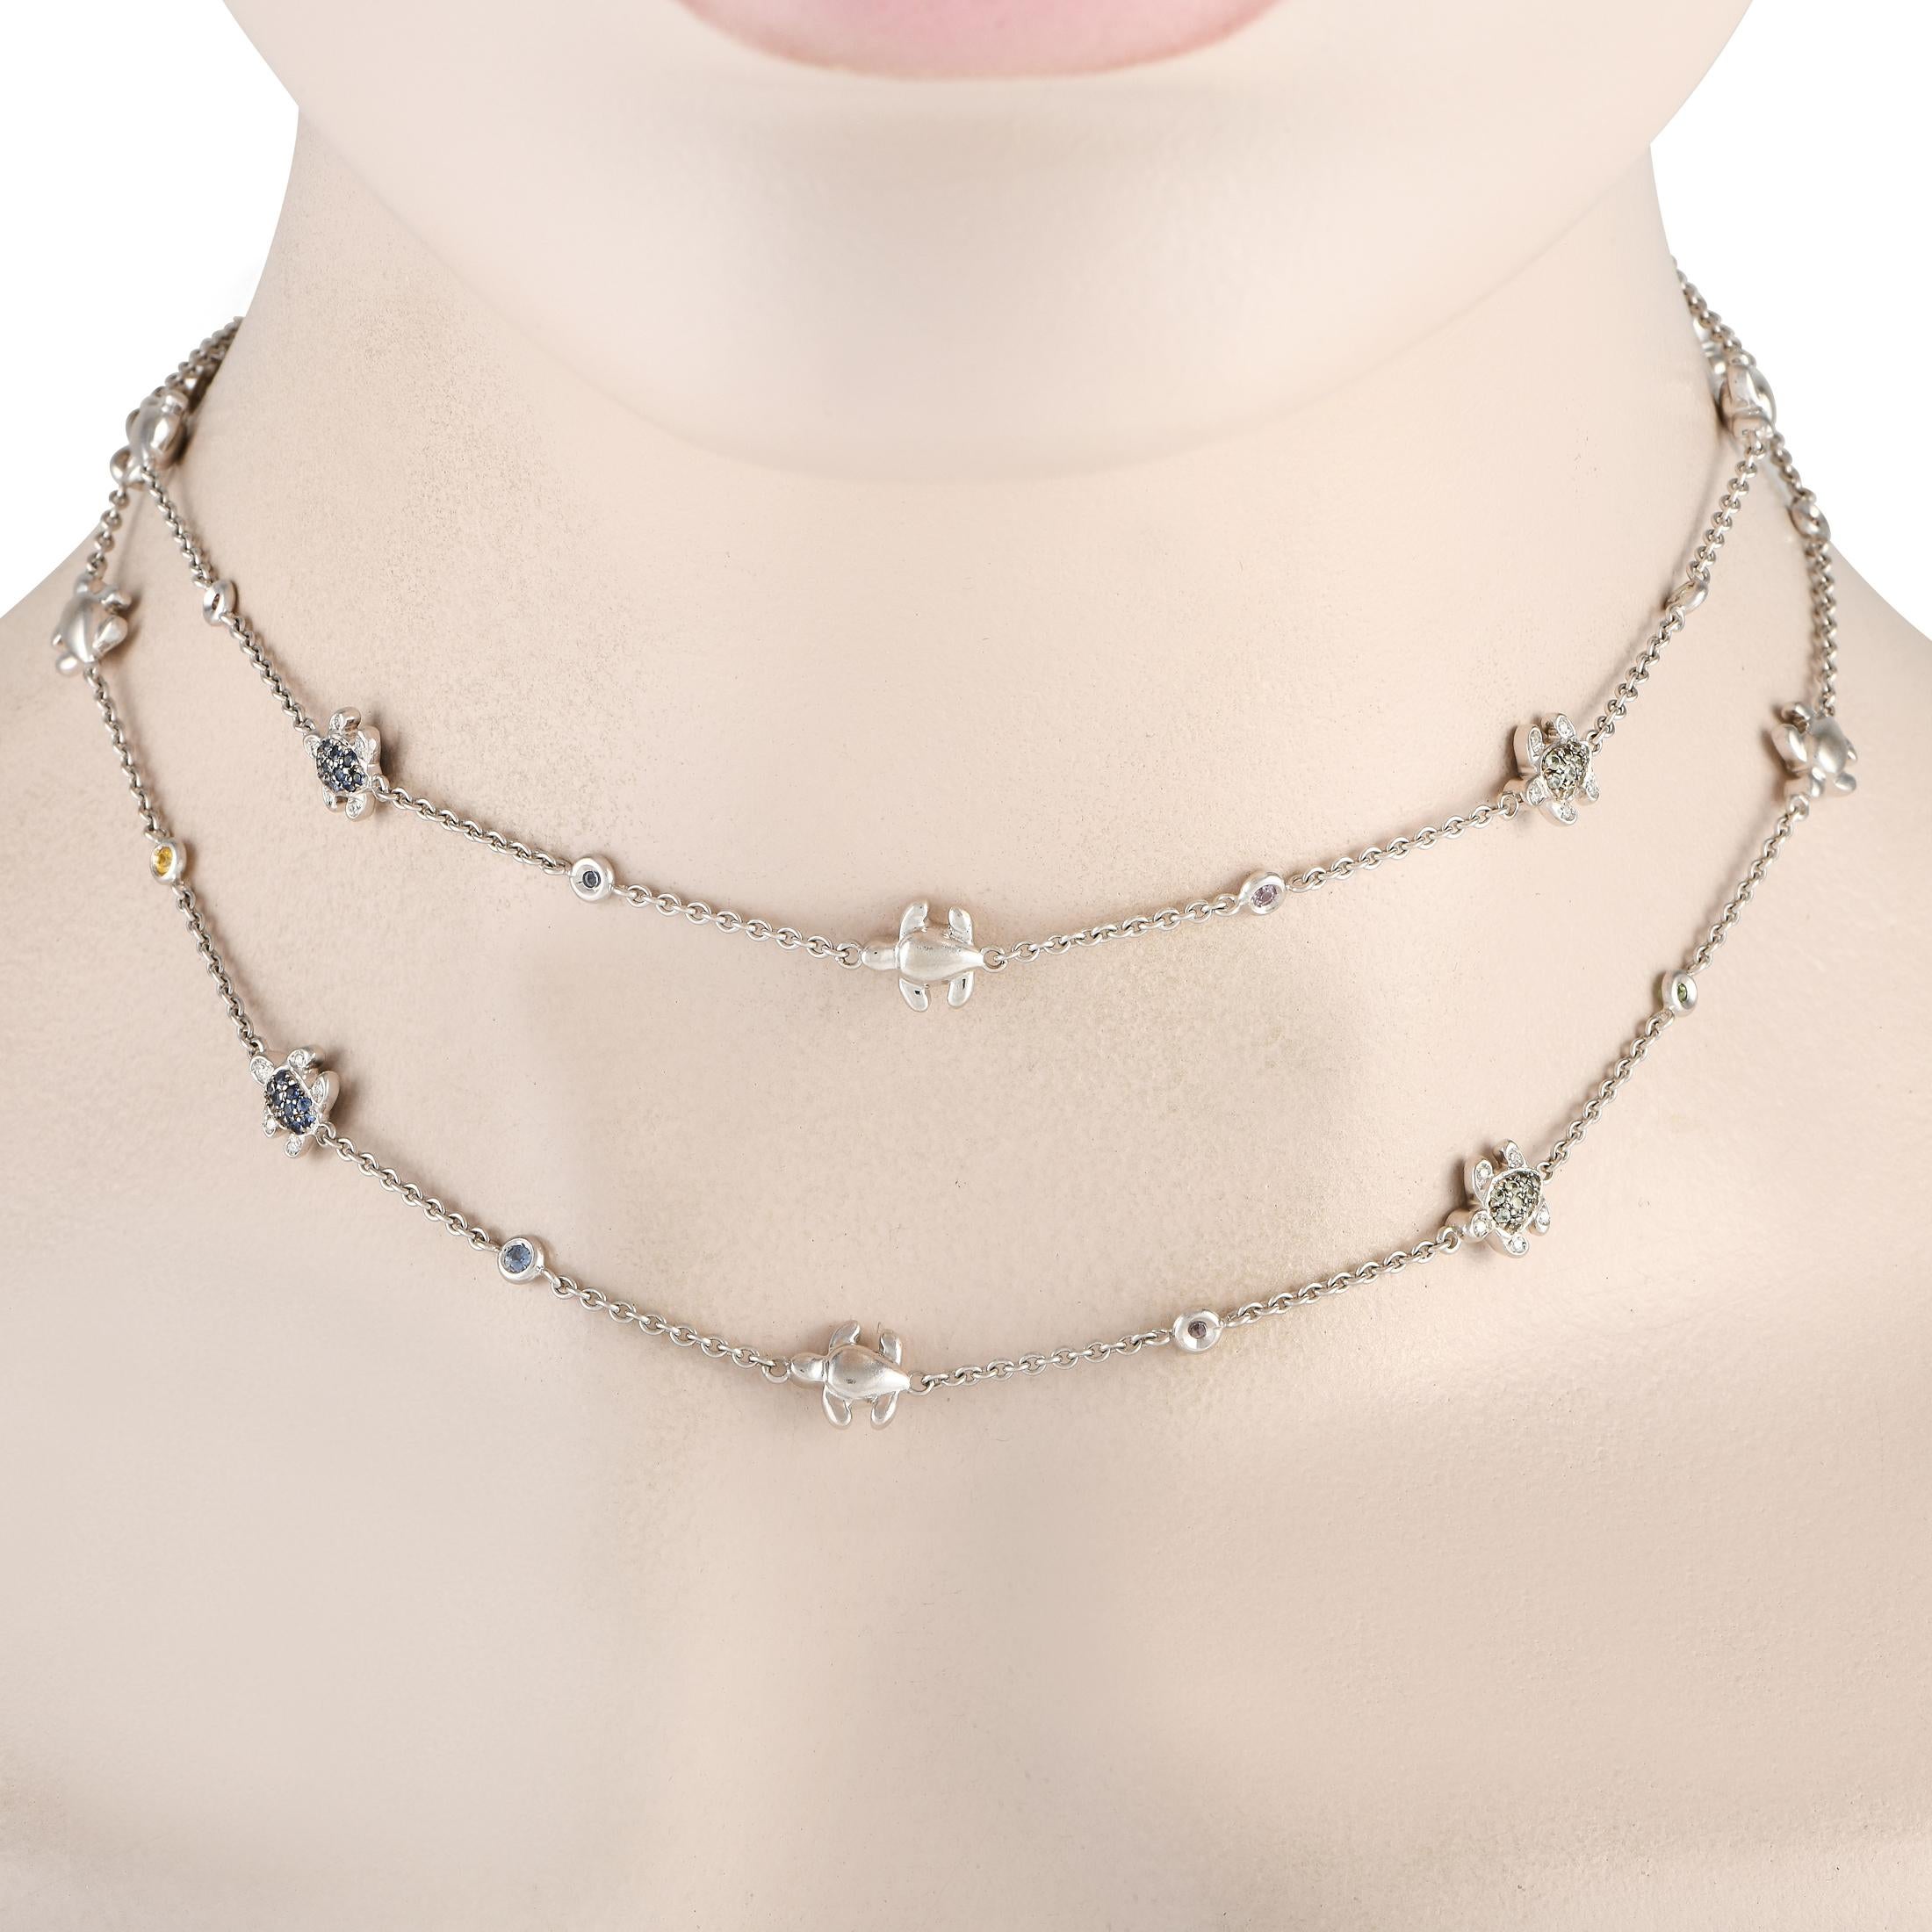 This charming Valentine Milano necklace will earn you endless compliments. Crafted from 18K White Gold, this delicate design features turtle motifs throughout the 30” chain. Colored Sapphire gemstones put the perfect finishing touch on this